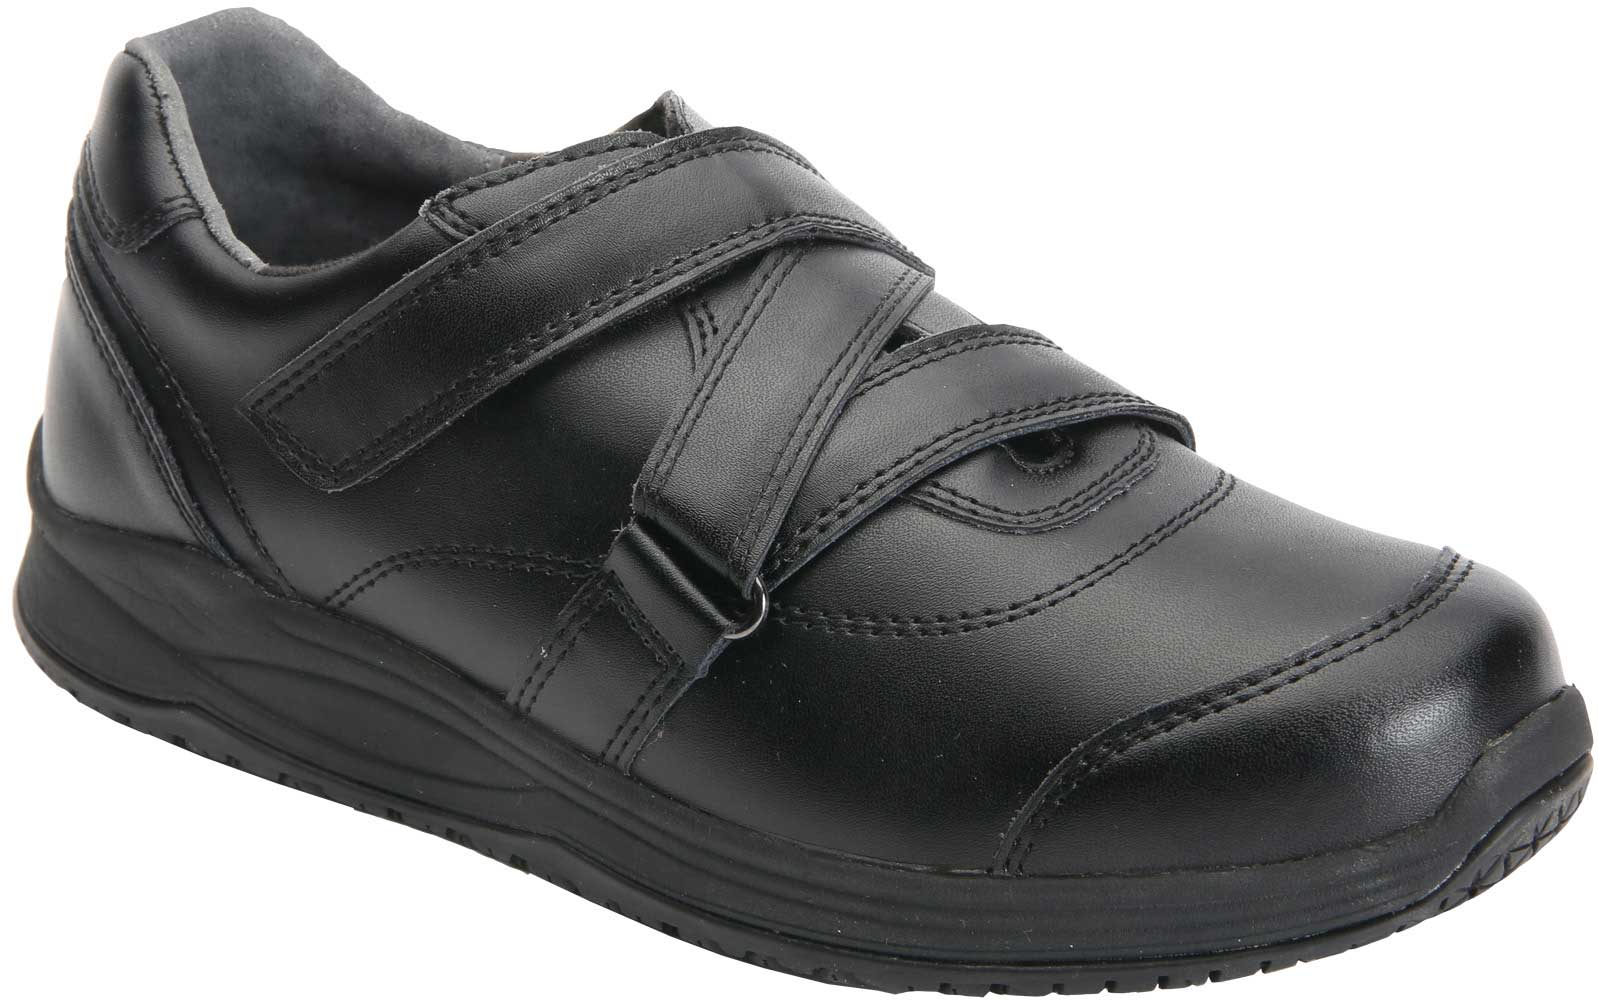 Drew Shoes Pepper 14484 - Women's Casual Comfort Therapeutic Diabetic Shoe - Extra Depth For Orthotics